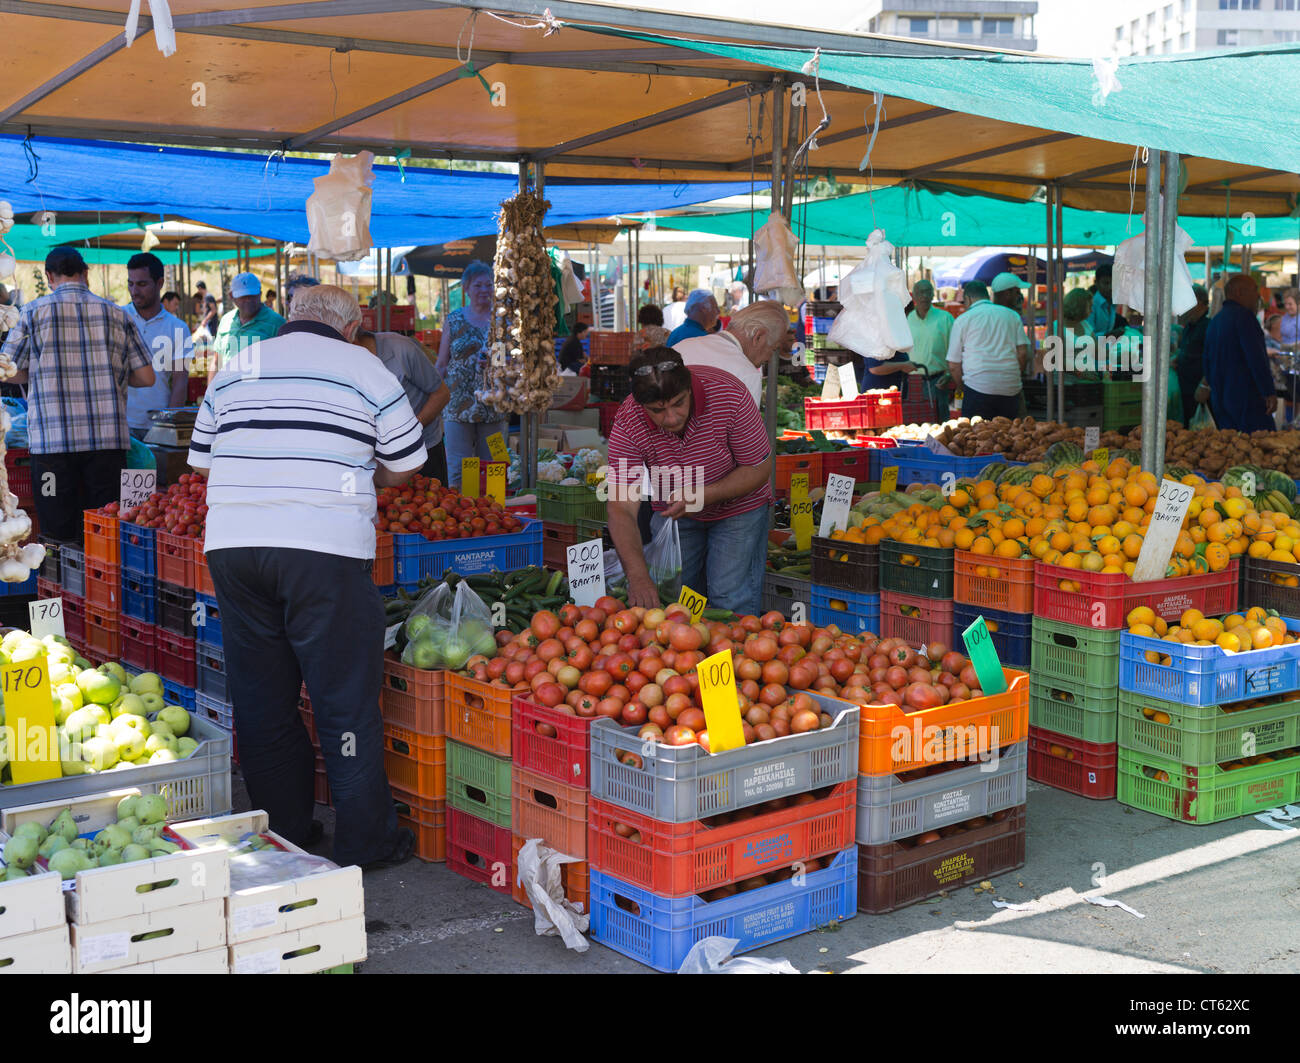 dh Lefkosia Market South NICOSIA CYPRUS Stall holder and customers at open air Saturday fruit and vegetable market Stock Photo